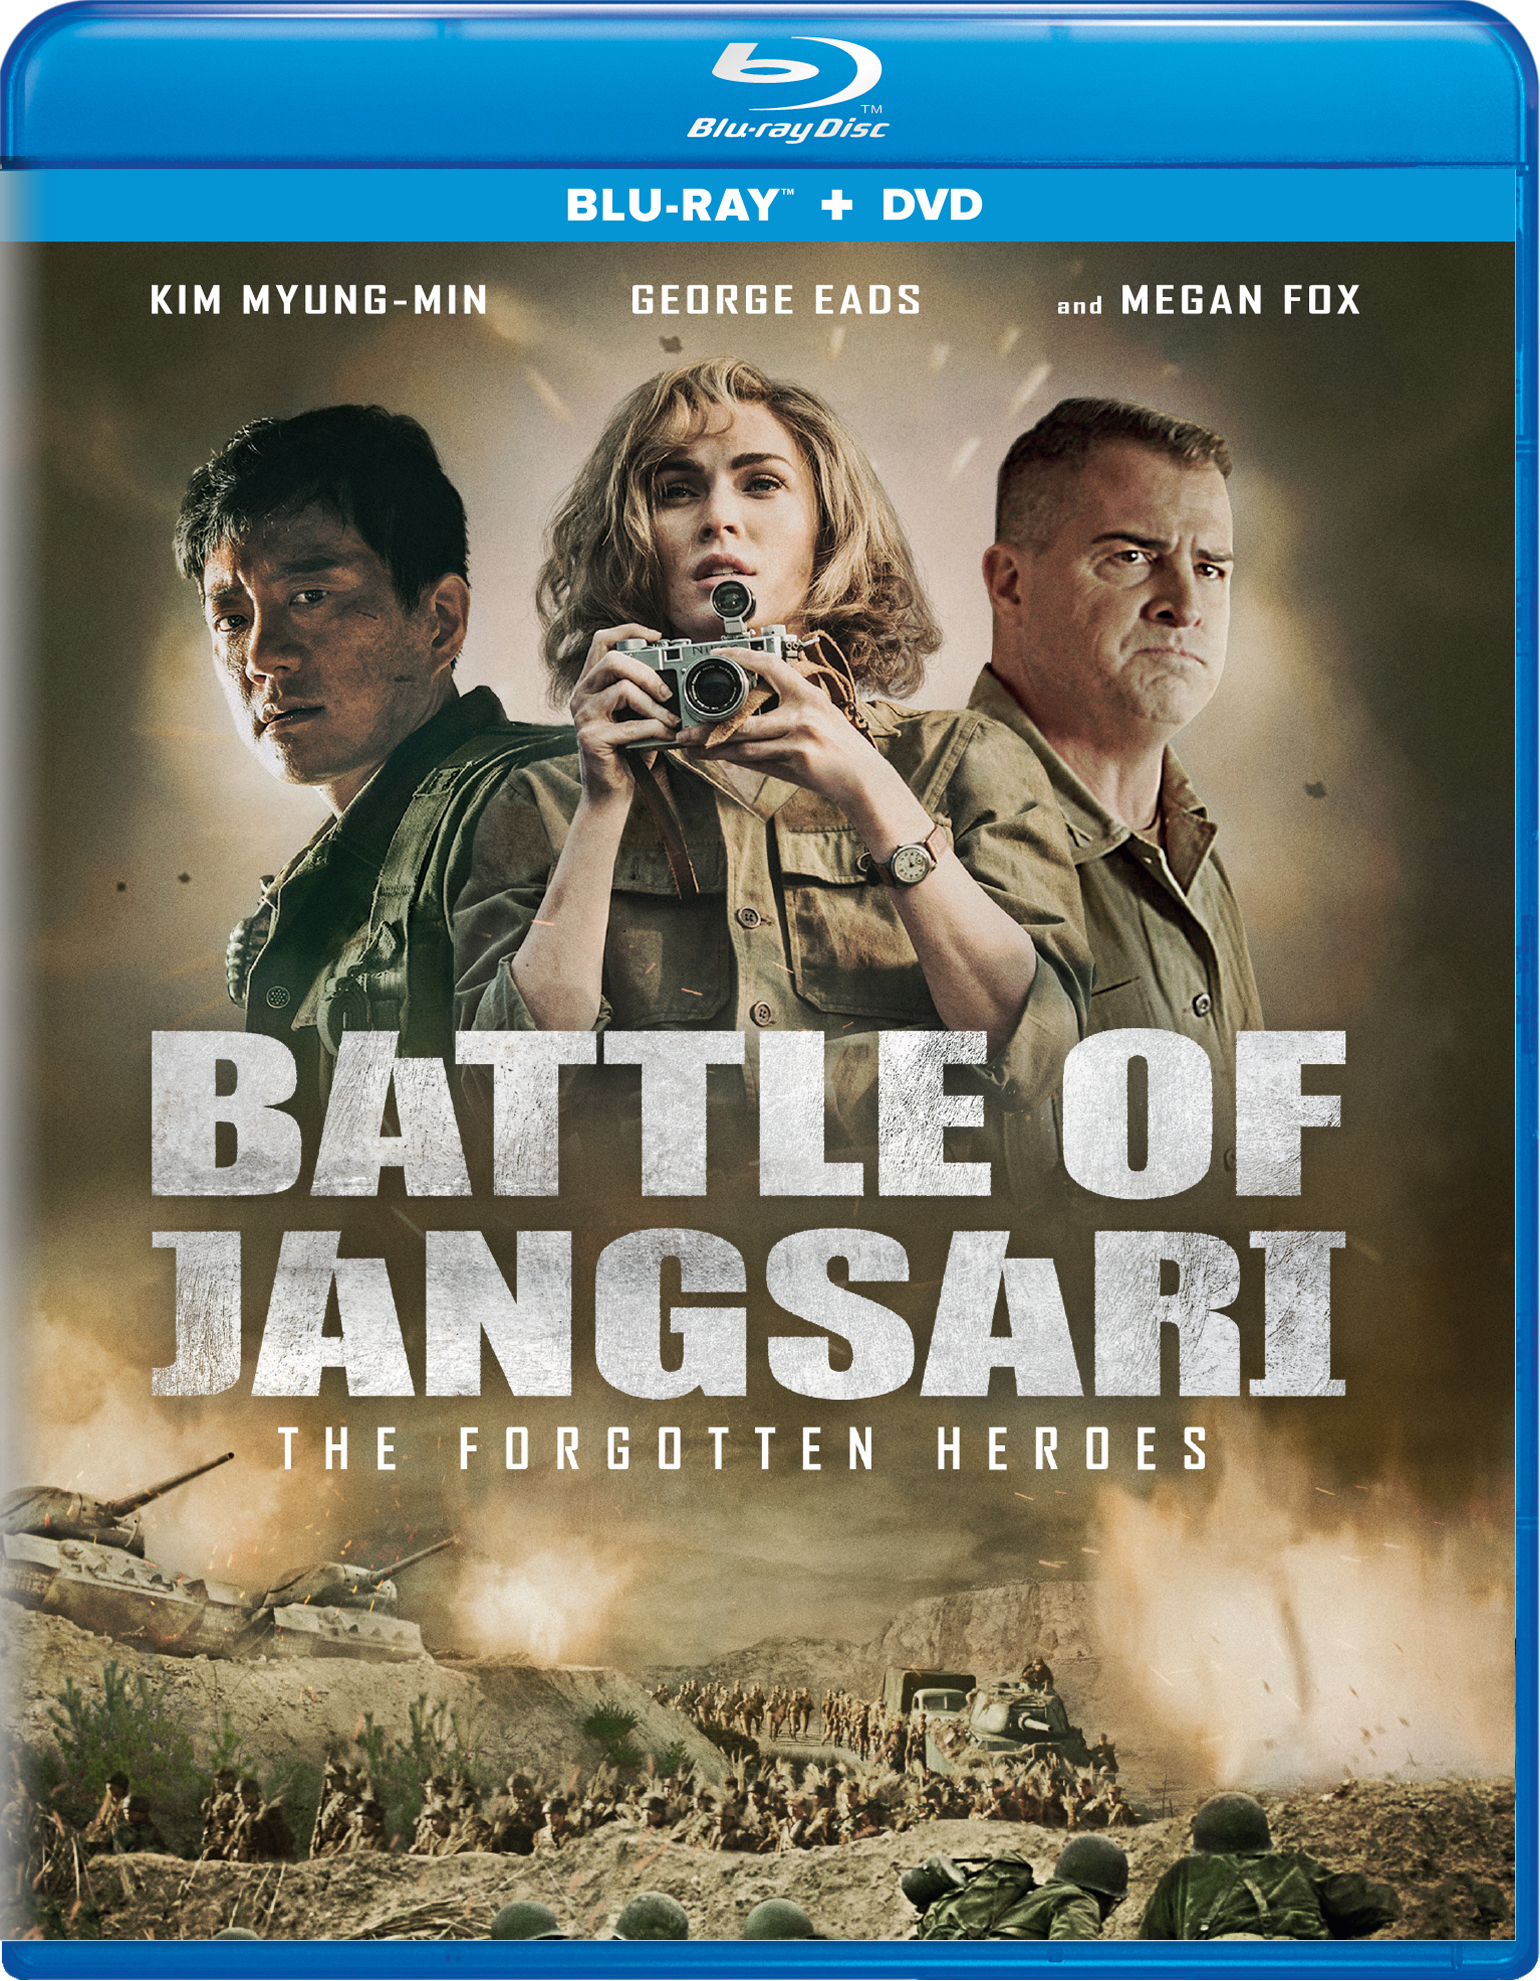 The Battle Of Jangsari (with DVD) - Blu-ray [ 2019 ]  - Action Movies On Blu-ray - Movies On GRUV